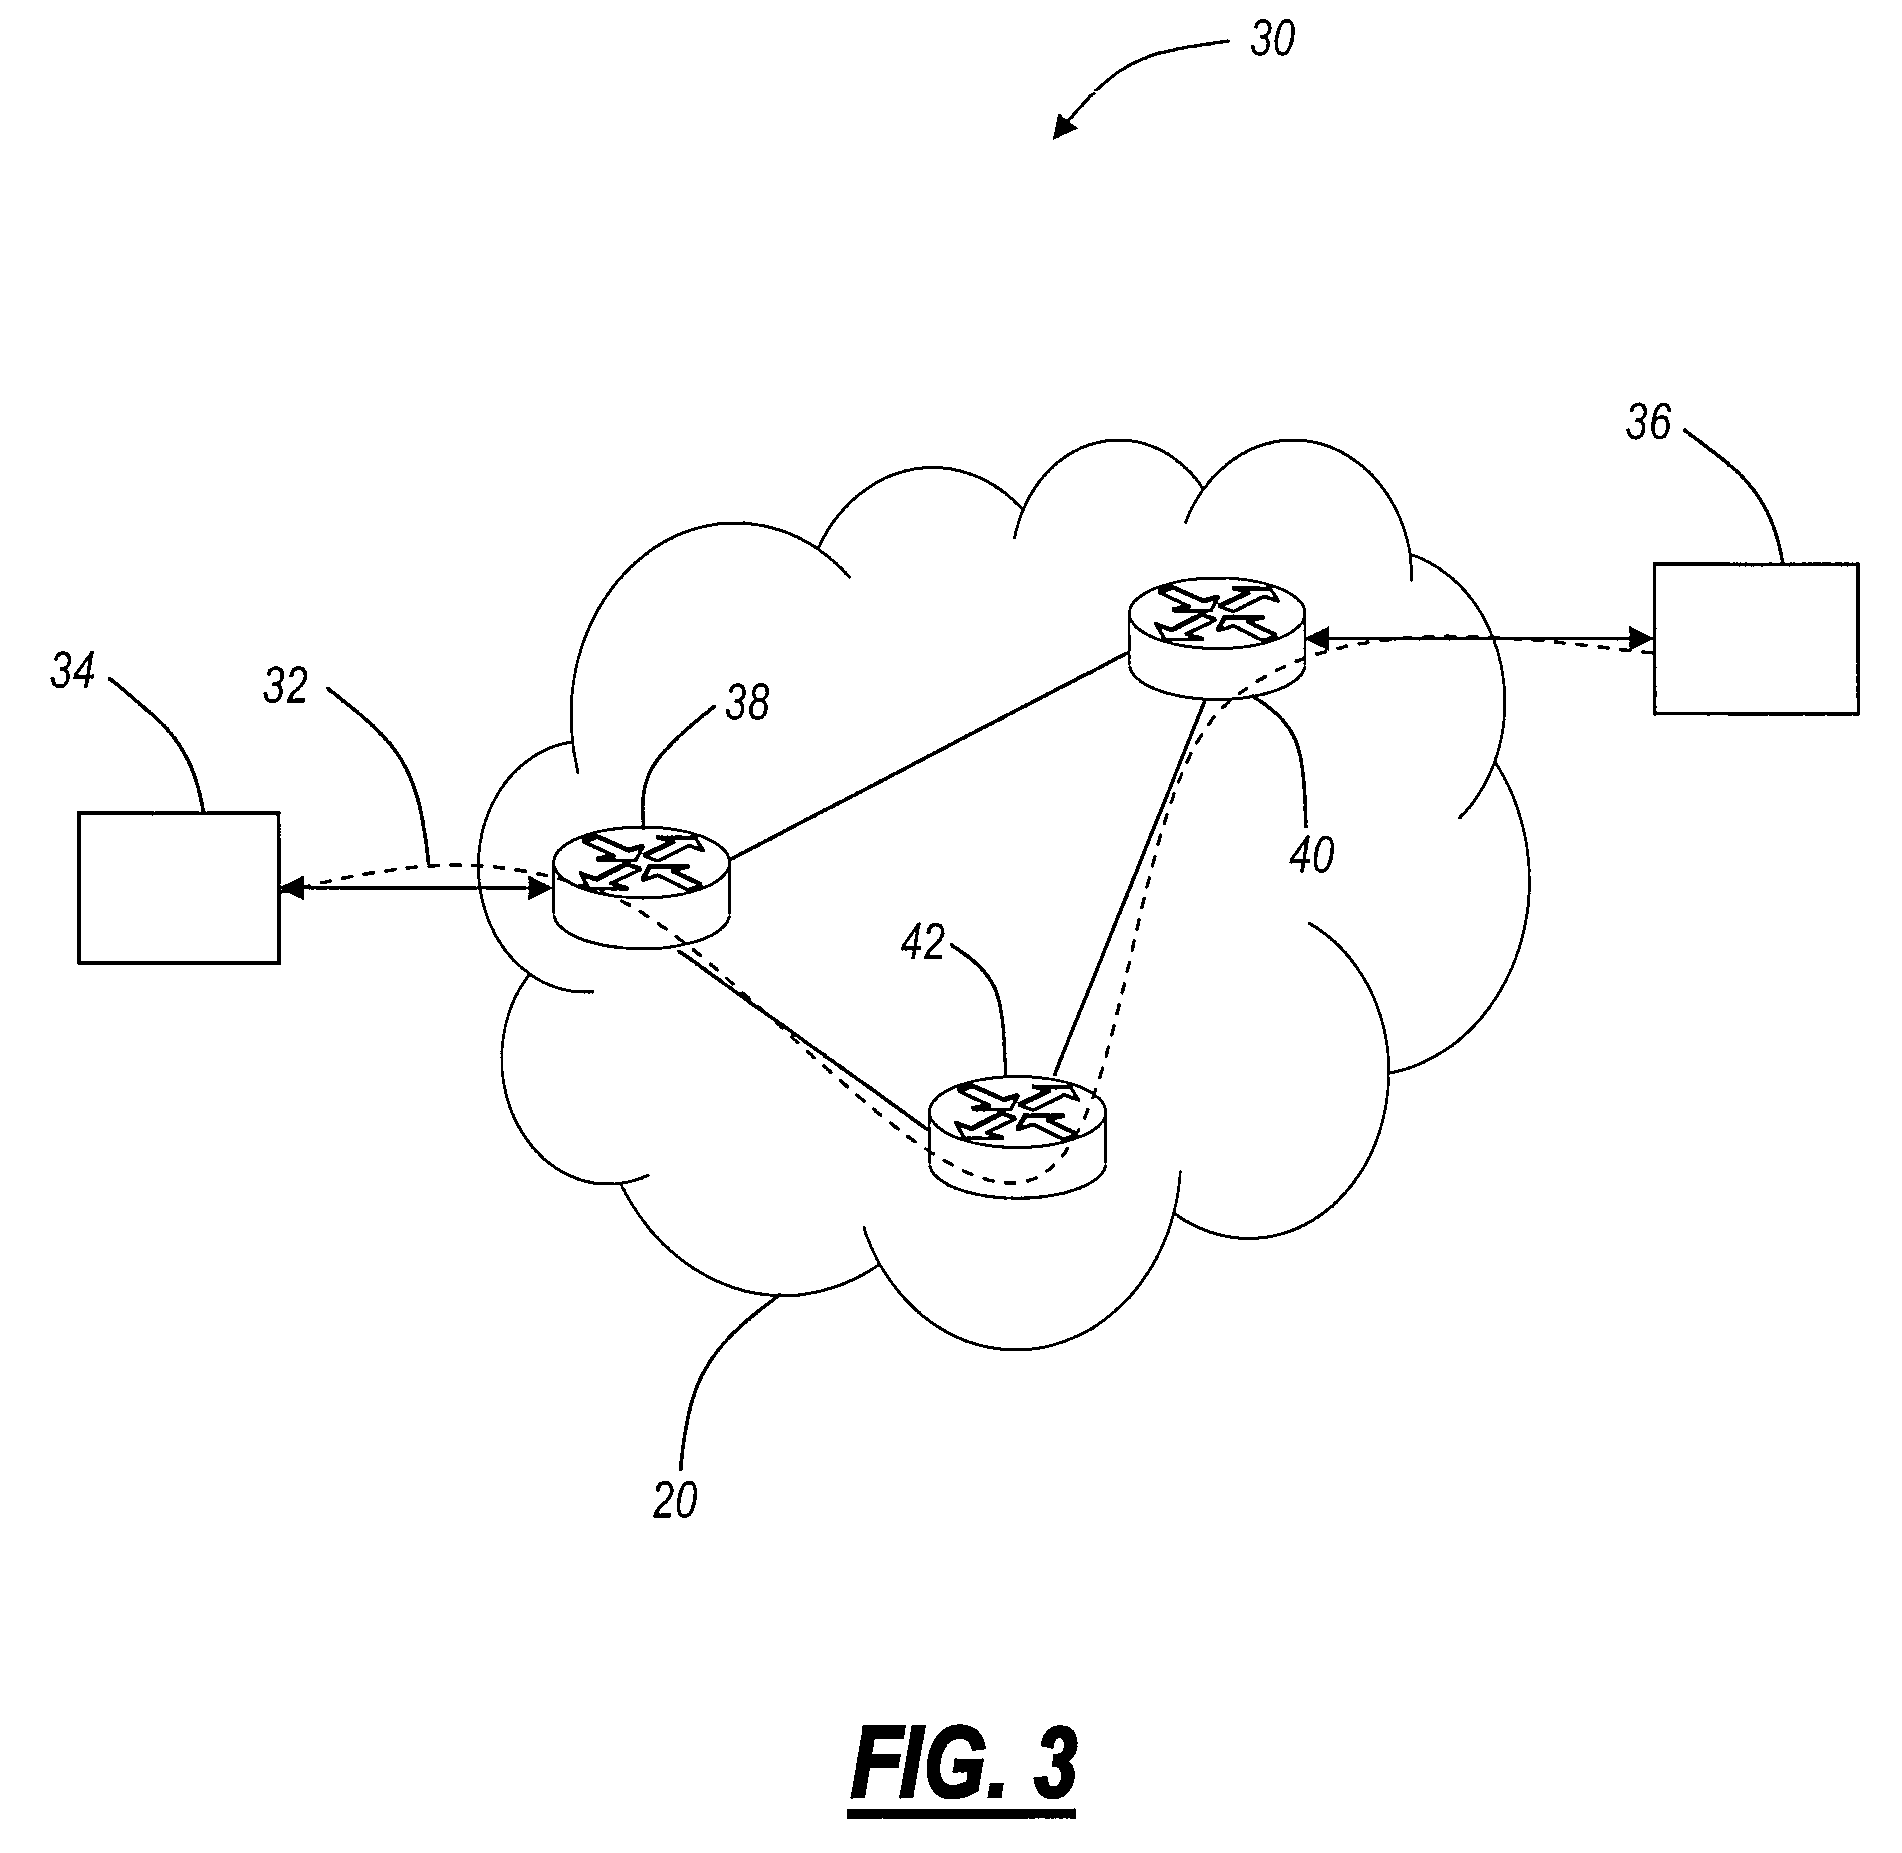 Systems and methods for carrier ethernet using referential tables for forwarding decisions